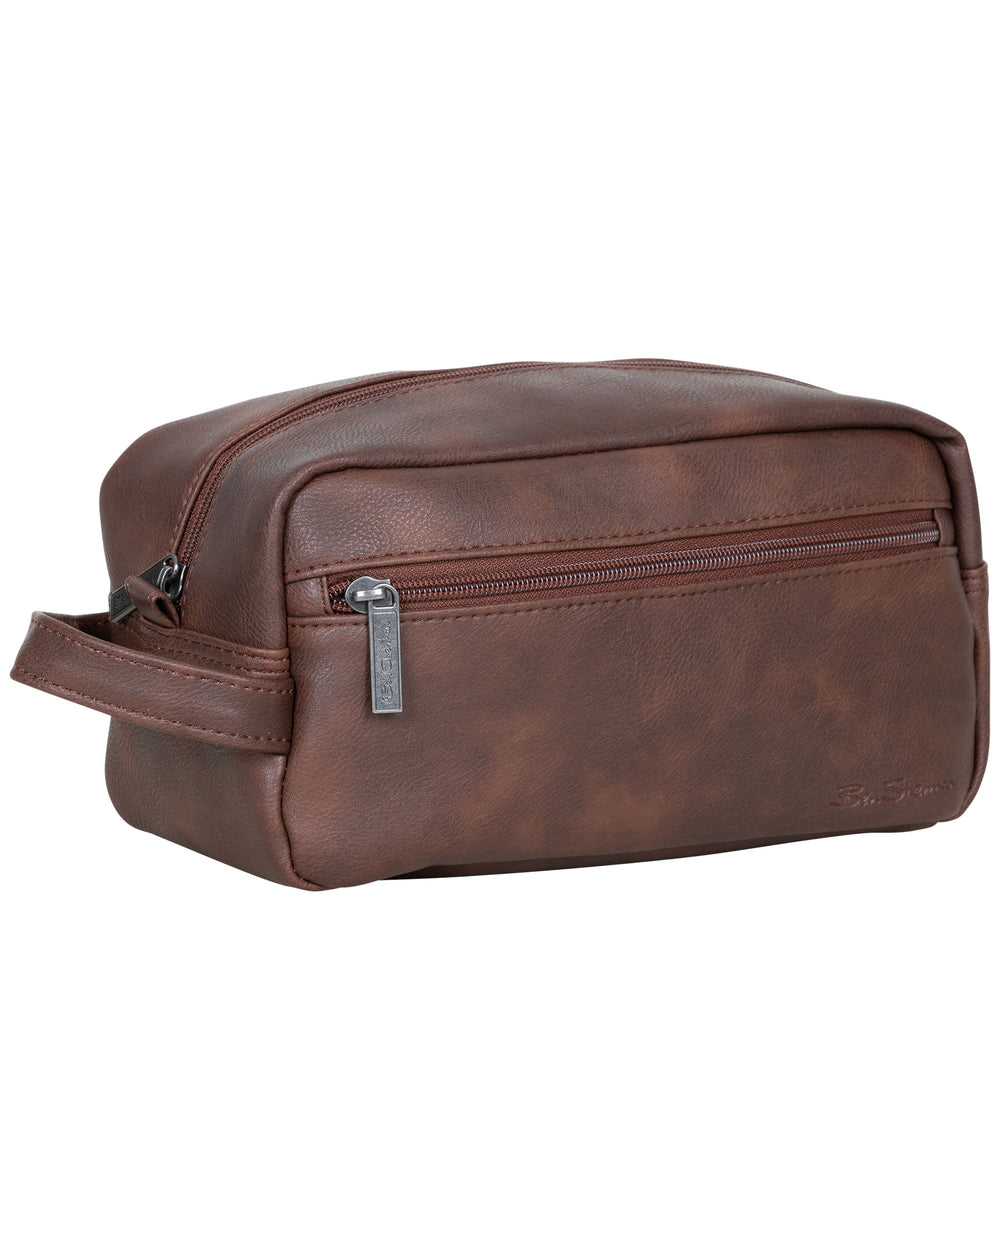 Vegan-Leather Compact Single-Compartment Top-Zip Travel Kit - Brown